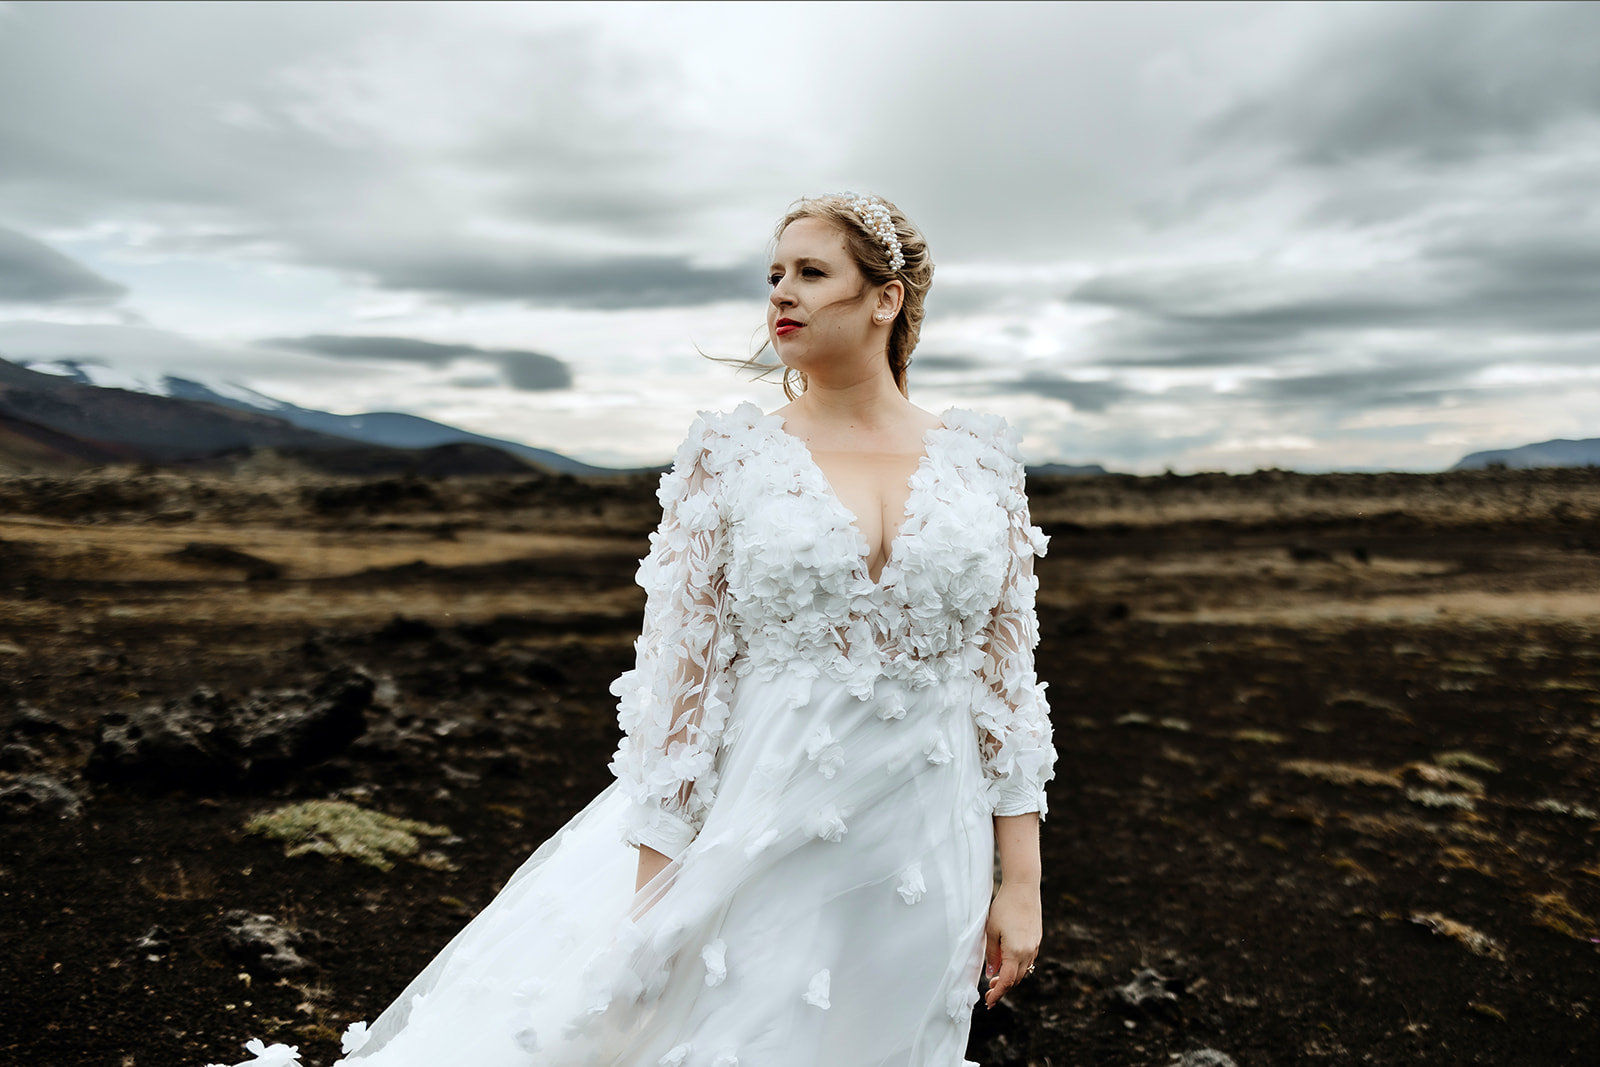 Brideis standing in the moody landscape of the Icelandic Highlands with dramatic sky.